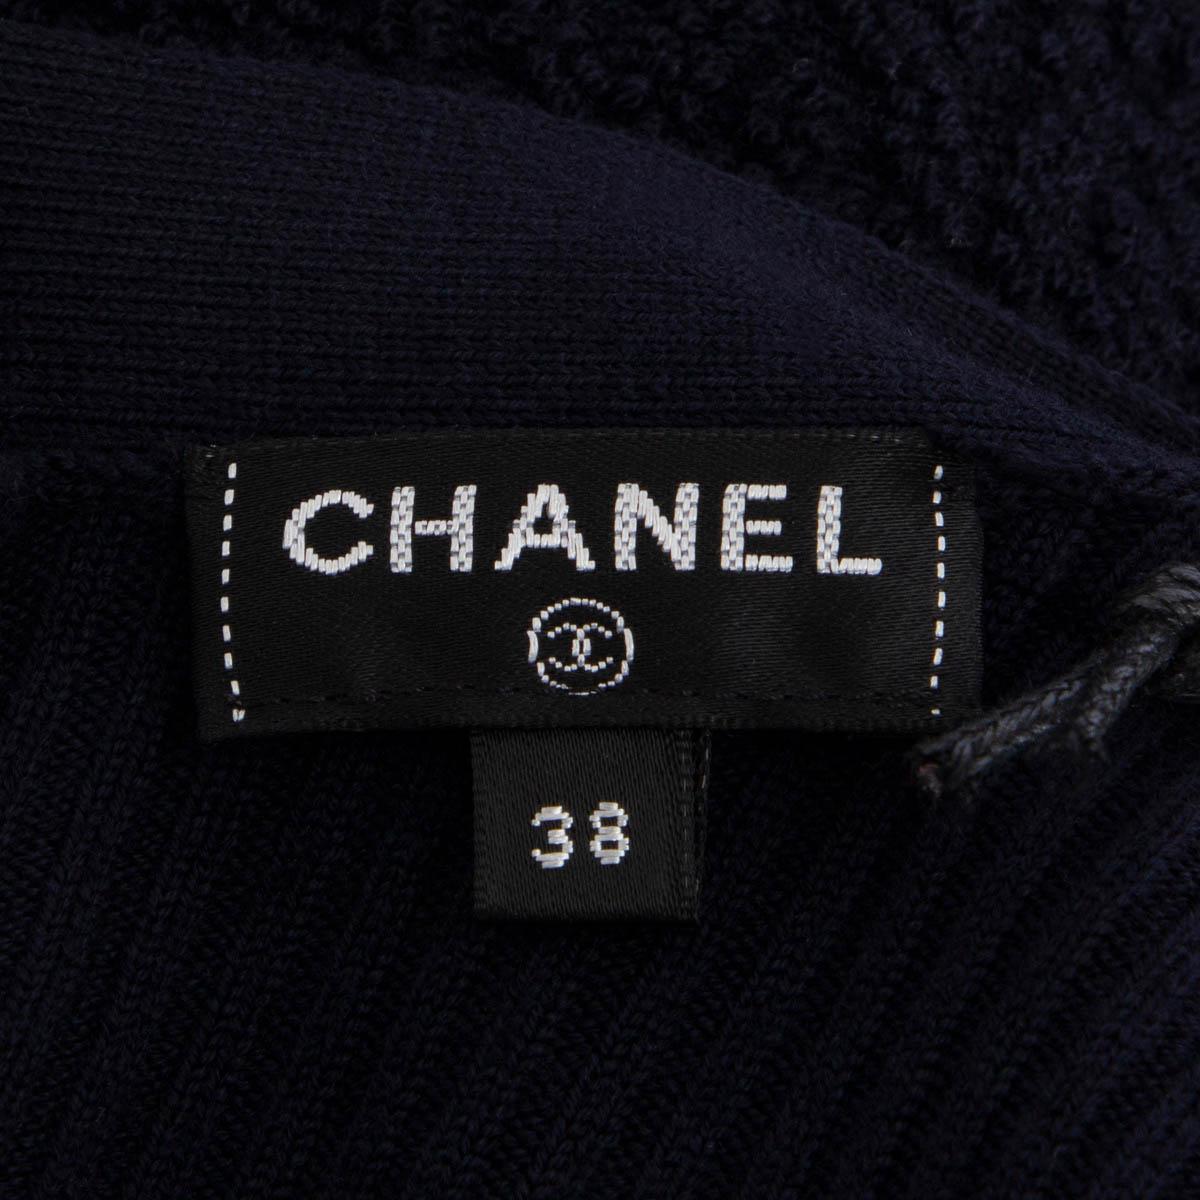 CHANEL navy blue wool 2019 19B SHORT SLEEVE TEXTURED KNIT Dress 38 S For Sale 3